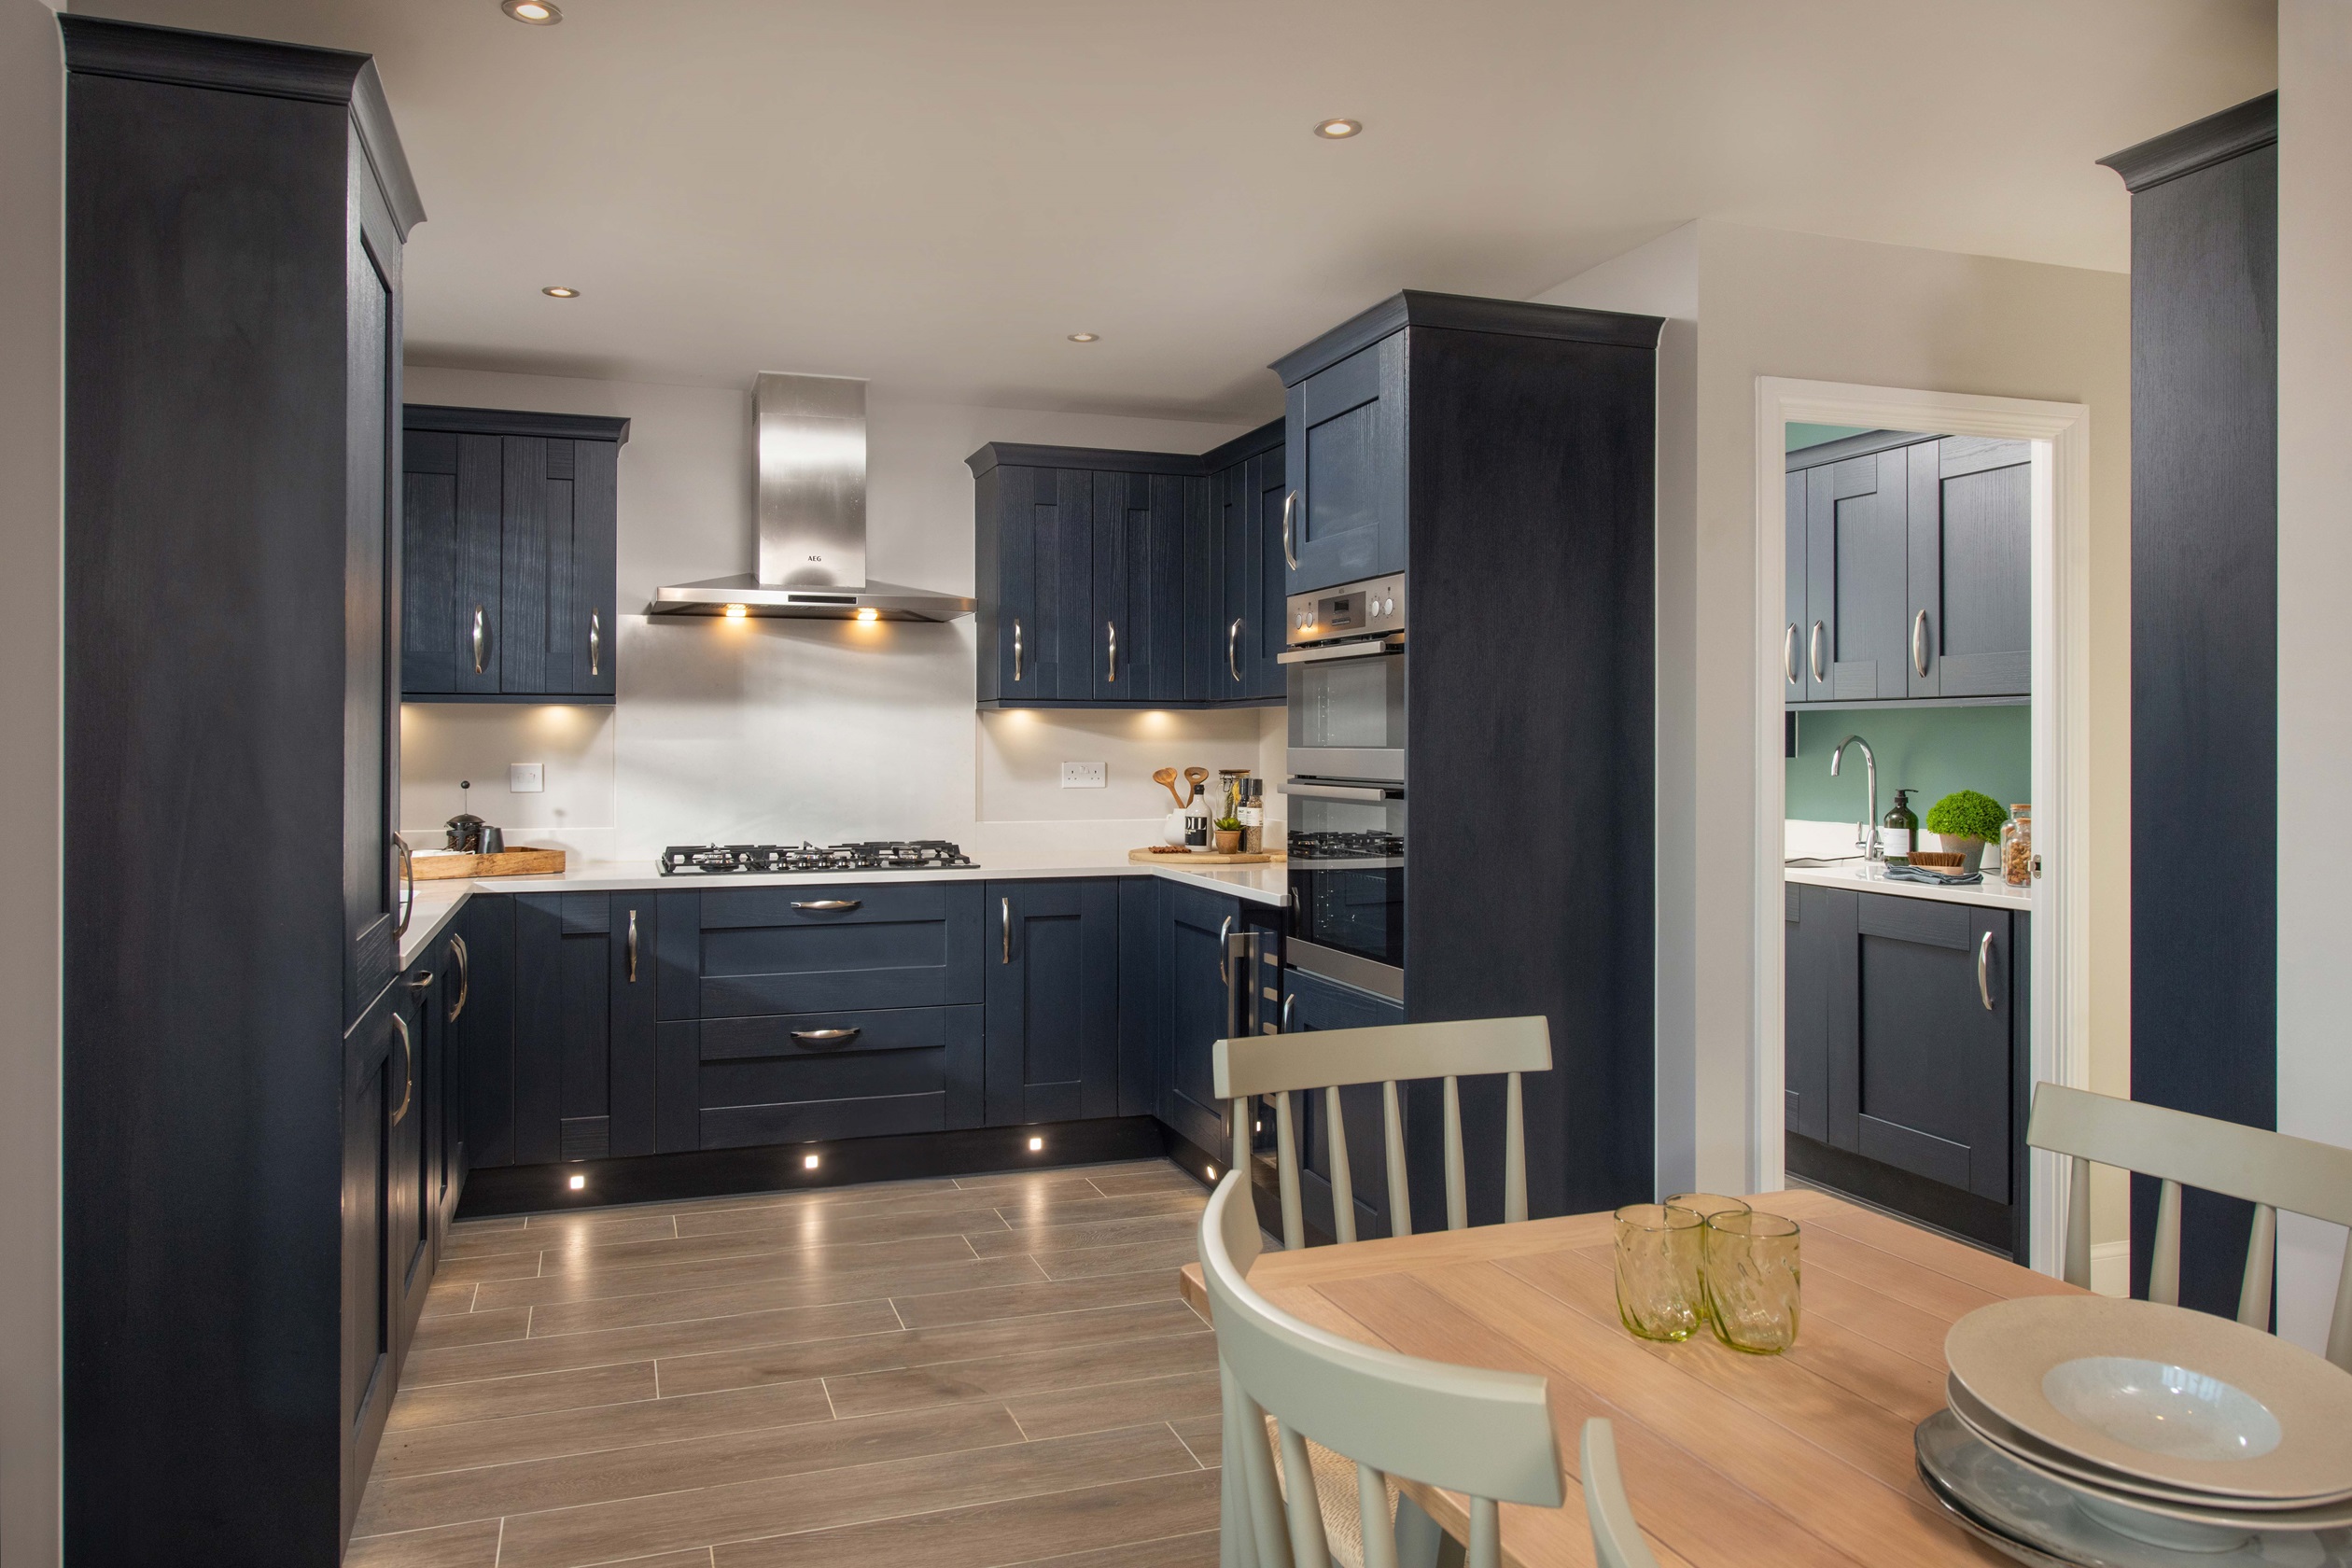 Property 3 of 10. Constable Gardens Winstone Kitchen